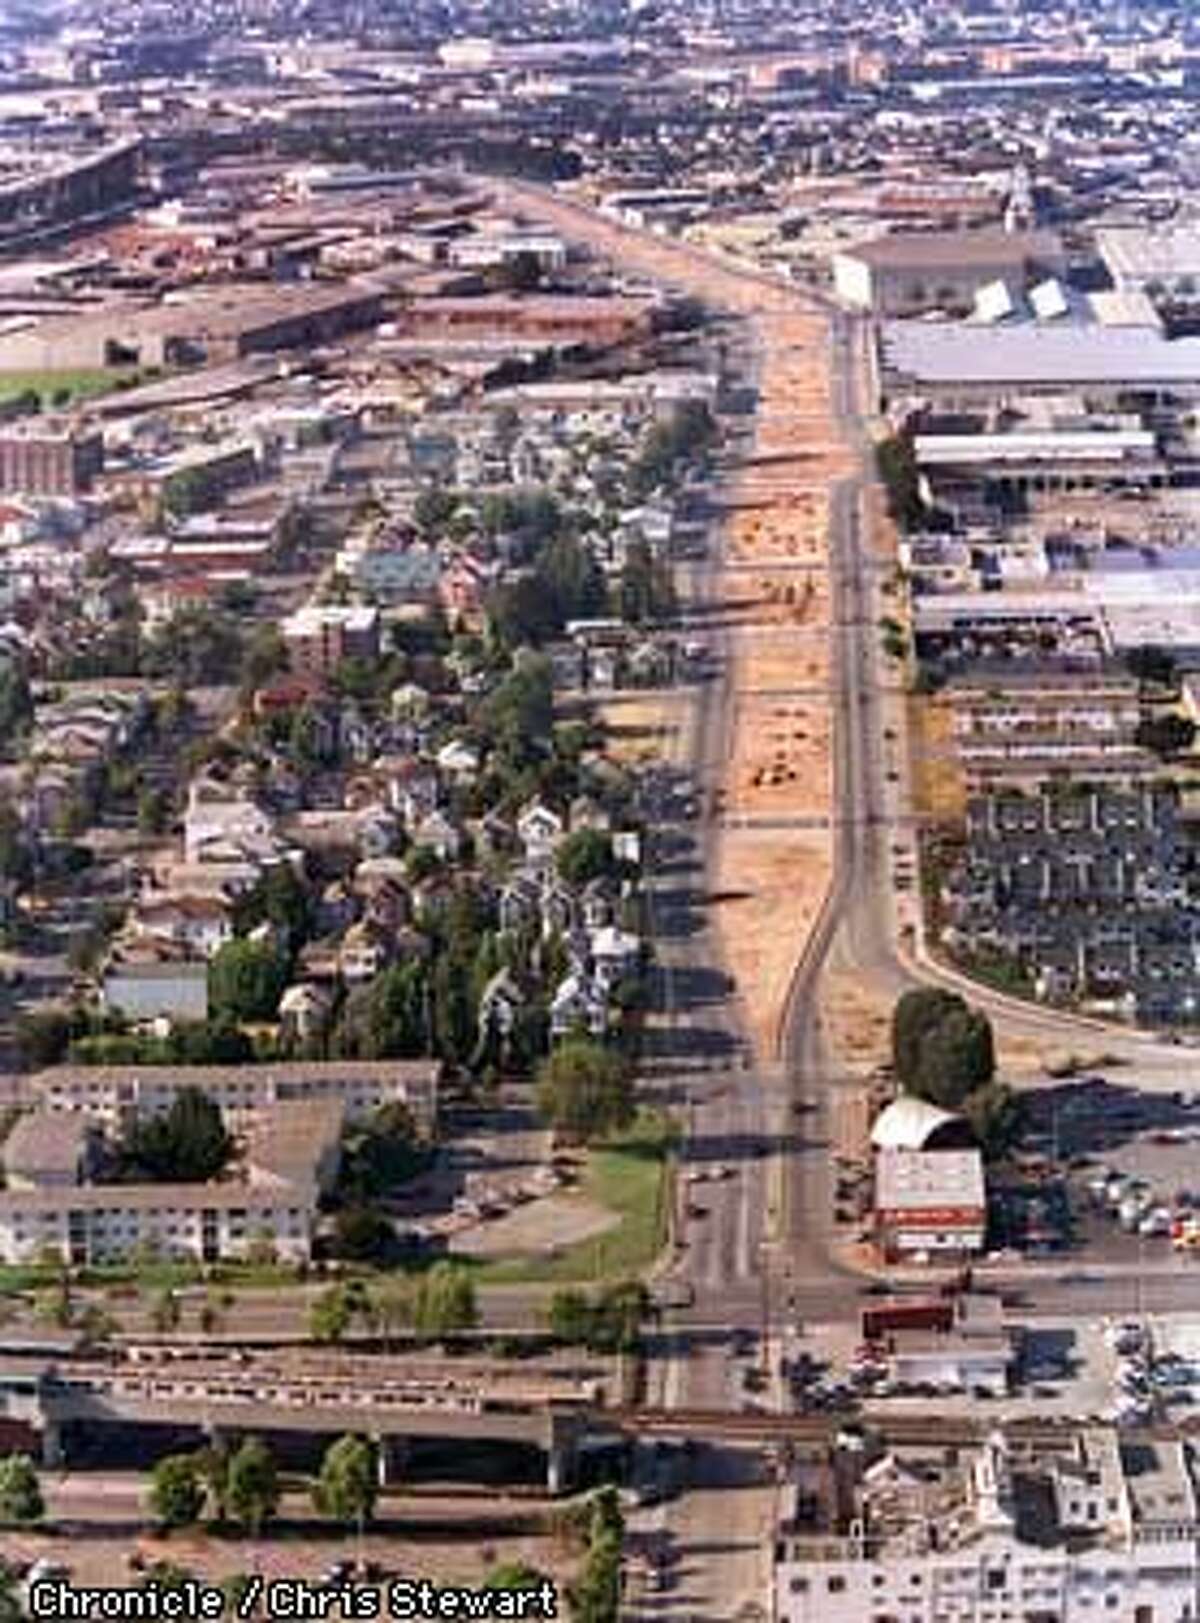 Long after the Cypress freeway structure in West Oakland was torn down following its destruction in the 1989 Loma Prieta earthquake, the ground level Mandela Parkway which replaced the Cypress remains a brown scar of unlandscaped dirt. A major portion of the rebuilt Cypress freeway should open within a month. SAN FRANCISCO CHRONICLE PHOTO BY CHRIS STEWART